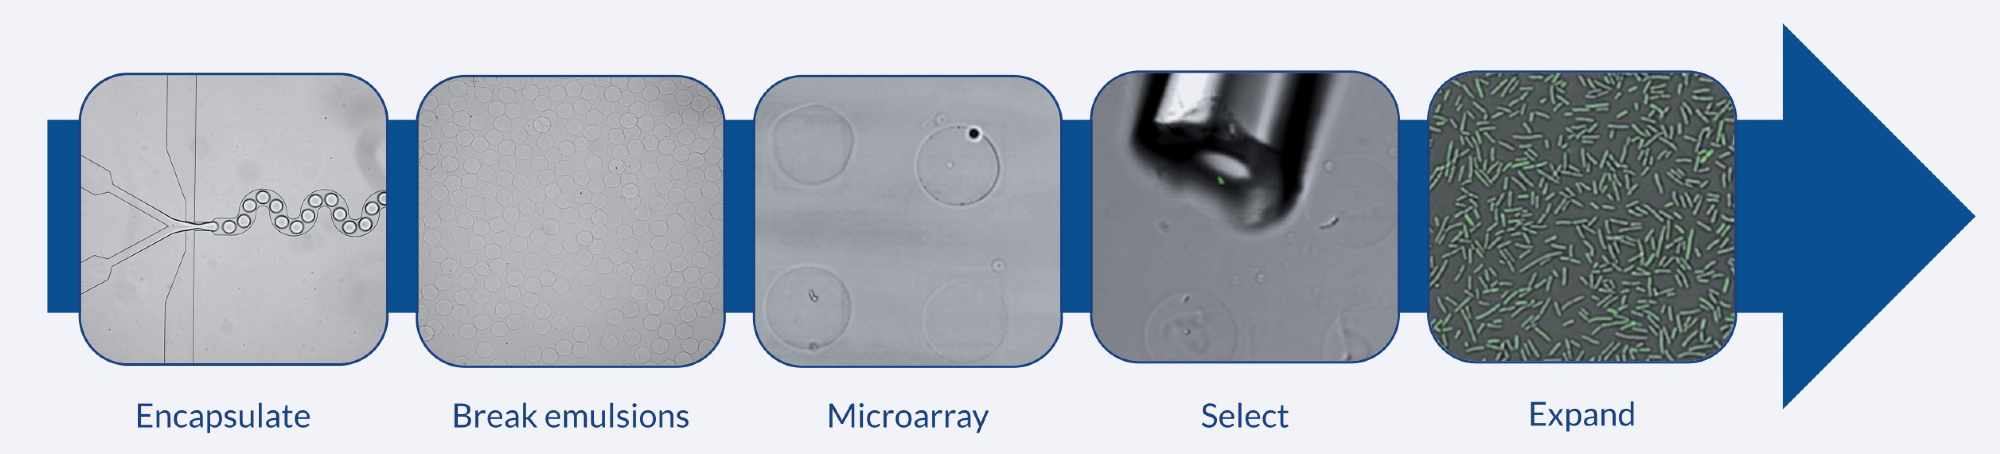 Workflow for array of alginate microbeads. Bacteria (P. putida) are encapsulated in CLEX hydrogel droplets and deposited on a PEI patterned surface to create an array. The clone of interest is selected and expanded.